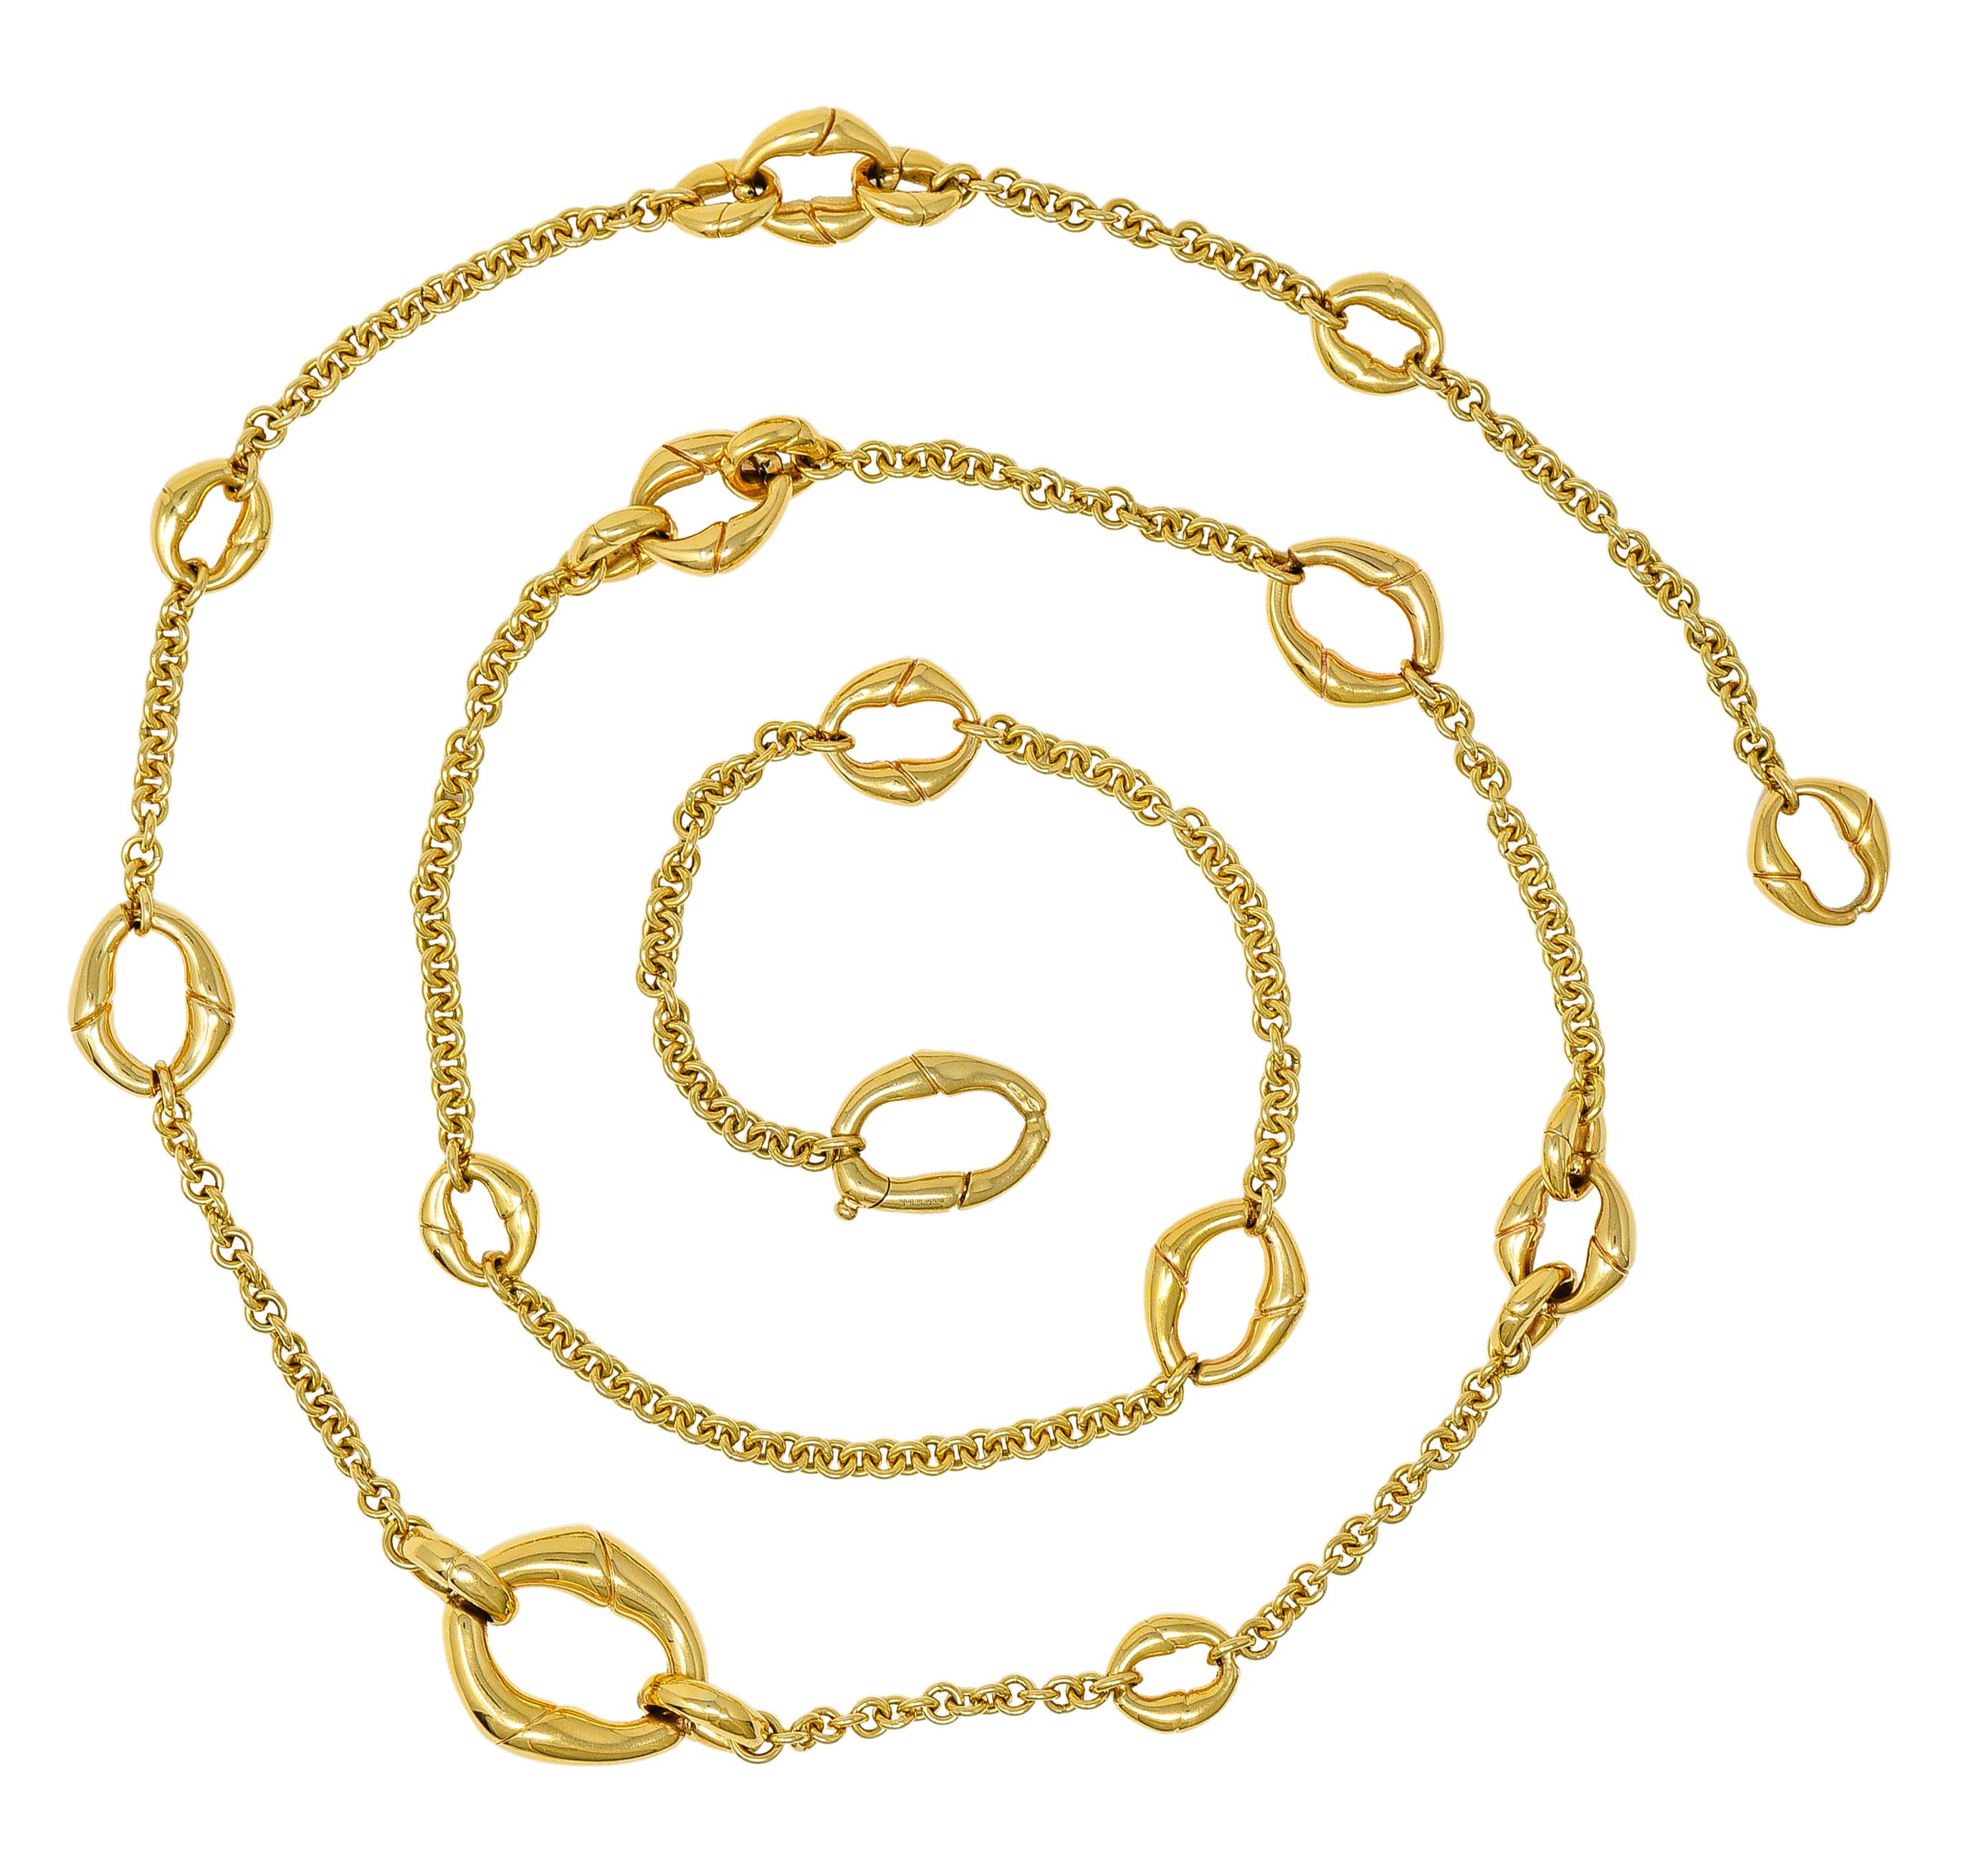 Gucci Contemporary 18 Karat Yellow Gold Bamboo Link Station Necklace. Comprised of cable chain with grooved oval shaped bamboo motif stations. Varying in size with a high polish finish. Links vary in size from 3/8 x 3/8 inch to 7/8 x 1 inch.